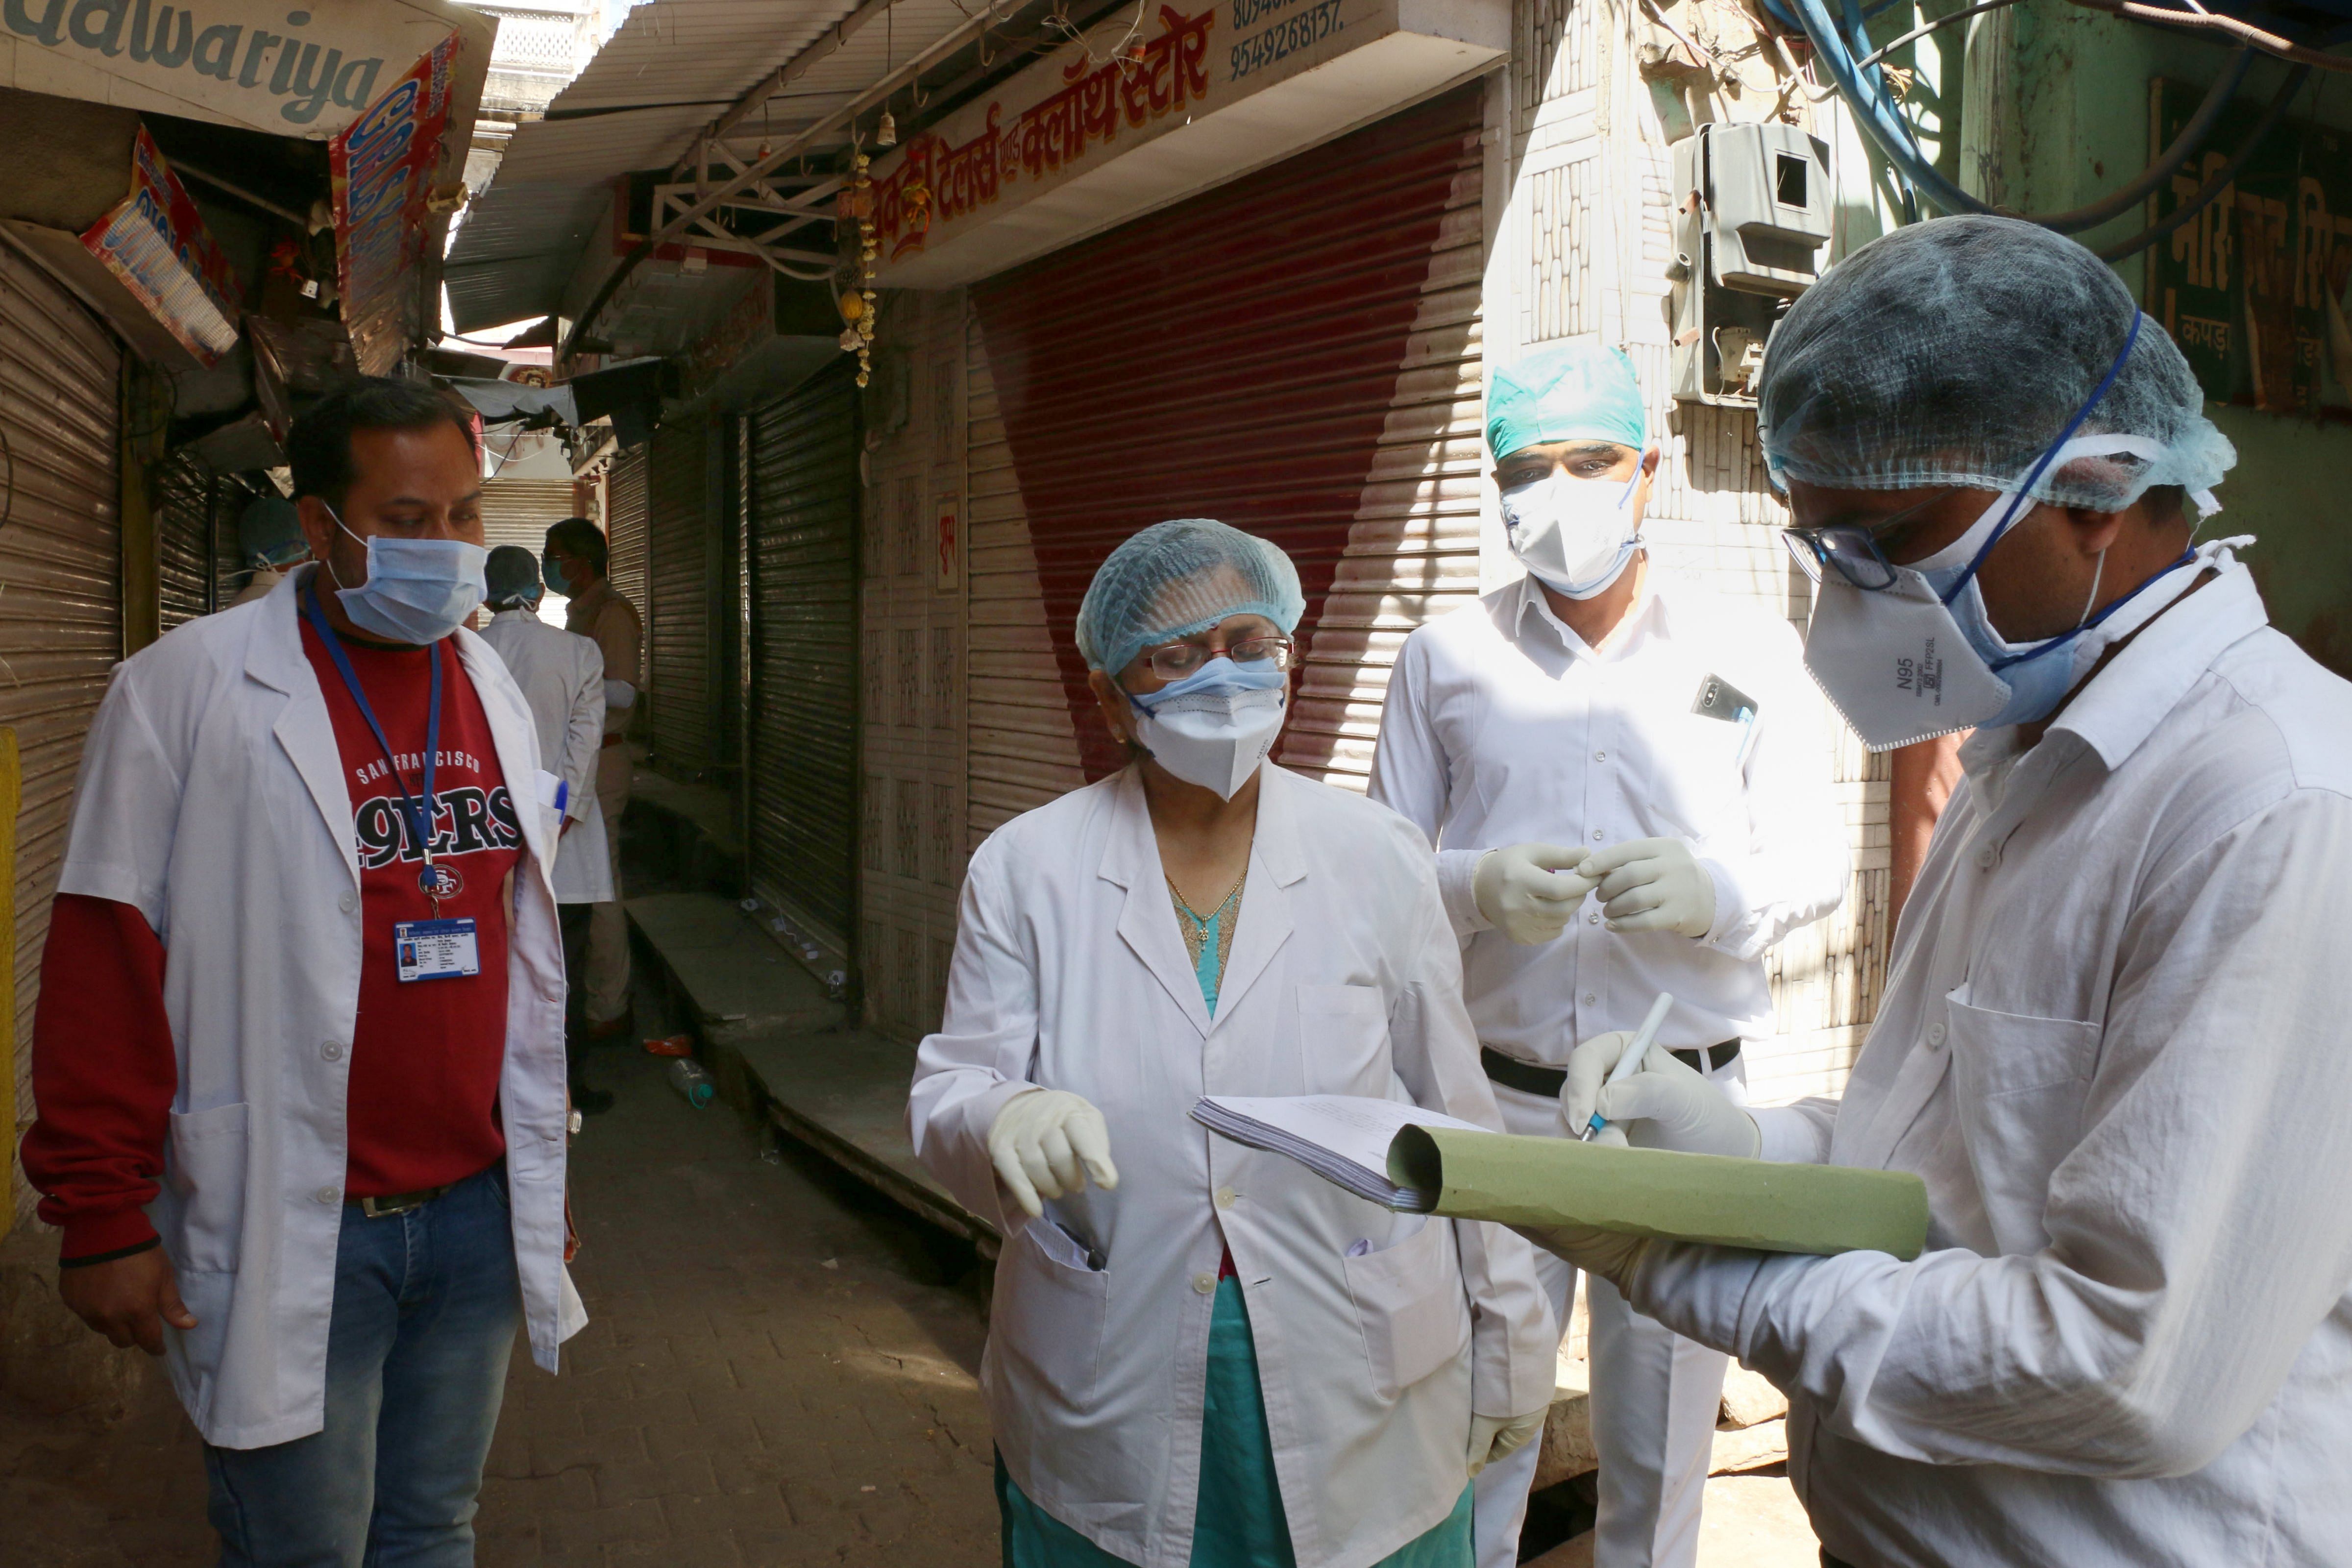 Health workers during a door-to-door survey for COVID 19 symptoms, during a nationwide lockdown imposed in the wake of the coronavirus pandemic, in Ajmer. (PTI Photo)